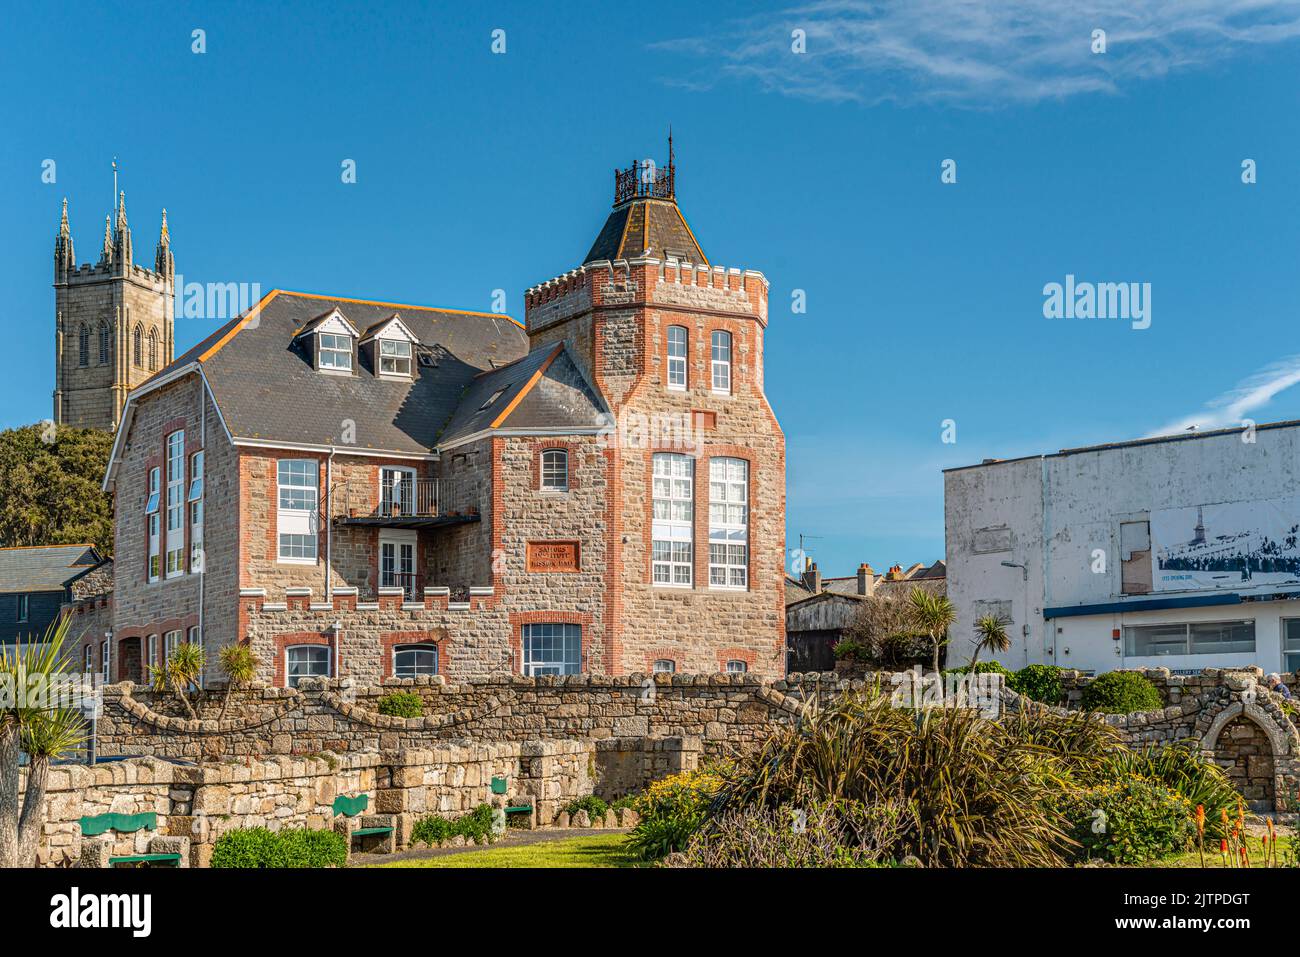 Sailors Institute and Mission Hall at Penzance Harbor, Cornwall, England, UK Stock Photo